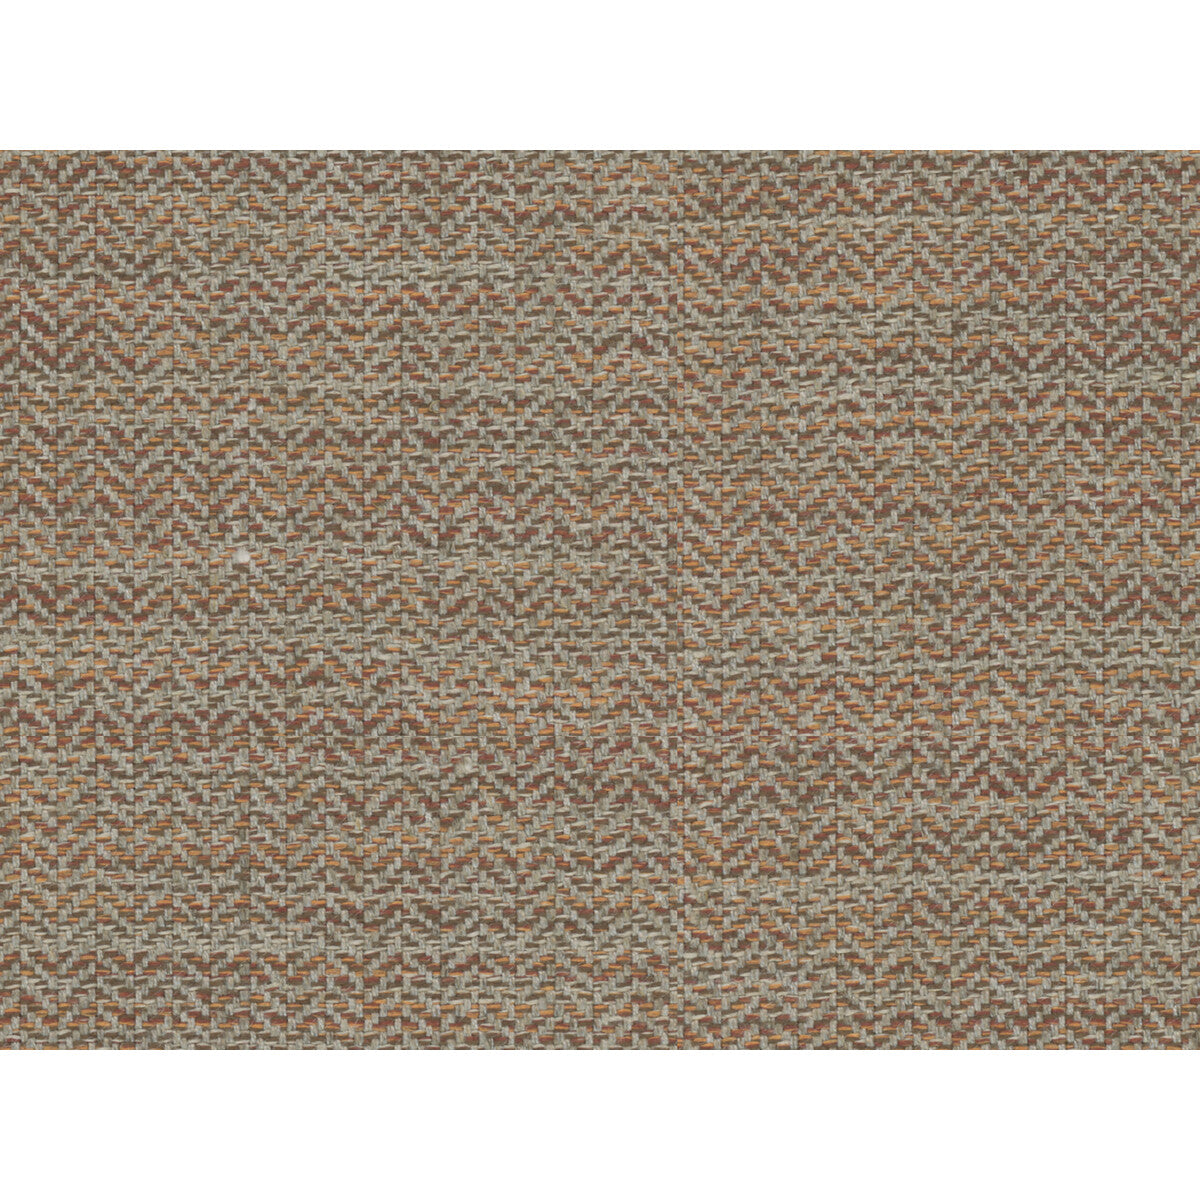 Art Spark fabric in copper color - pattern 34409.1624.0 - by Kravet Couture